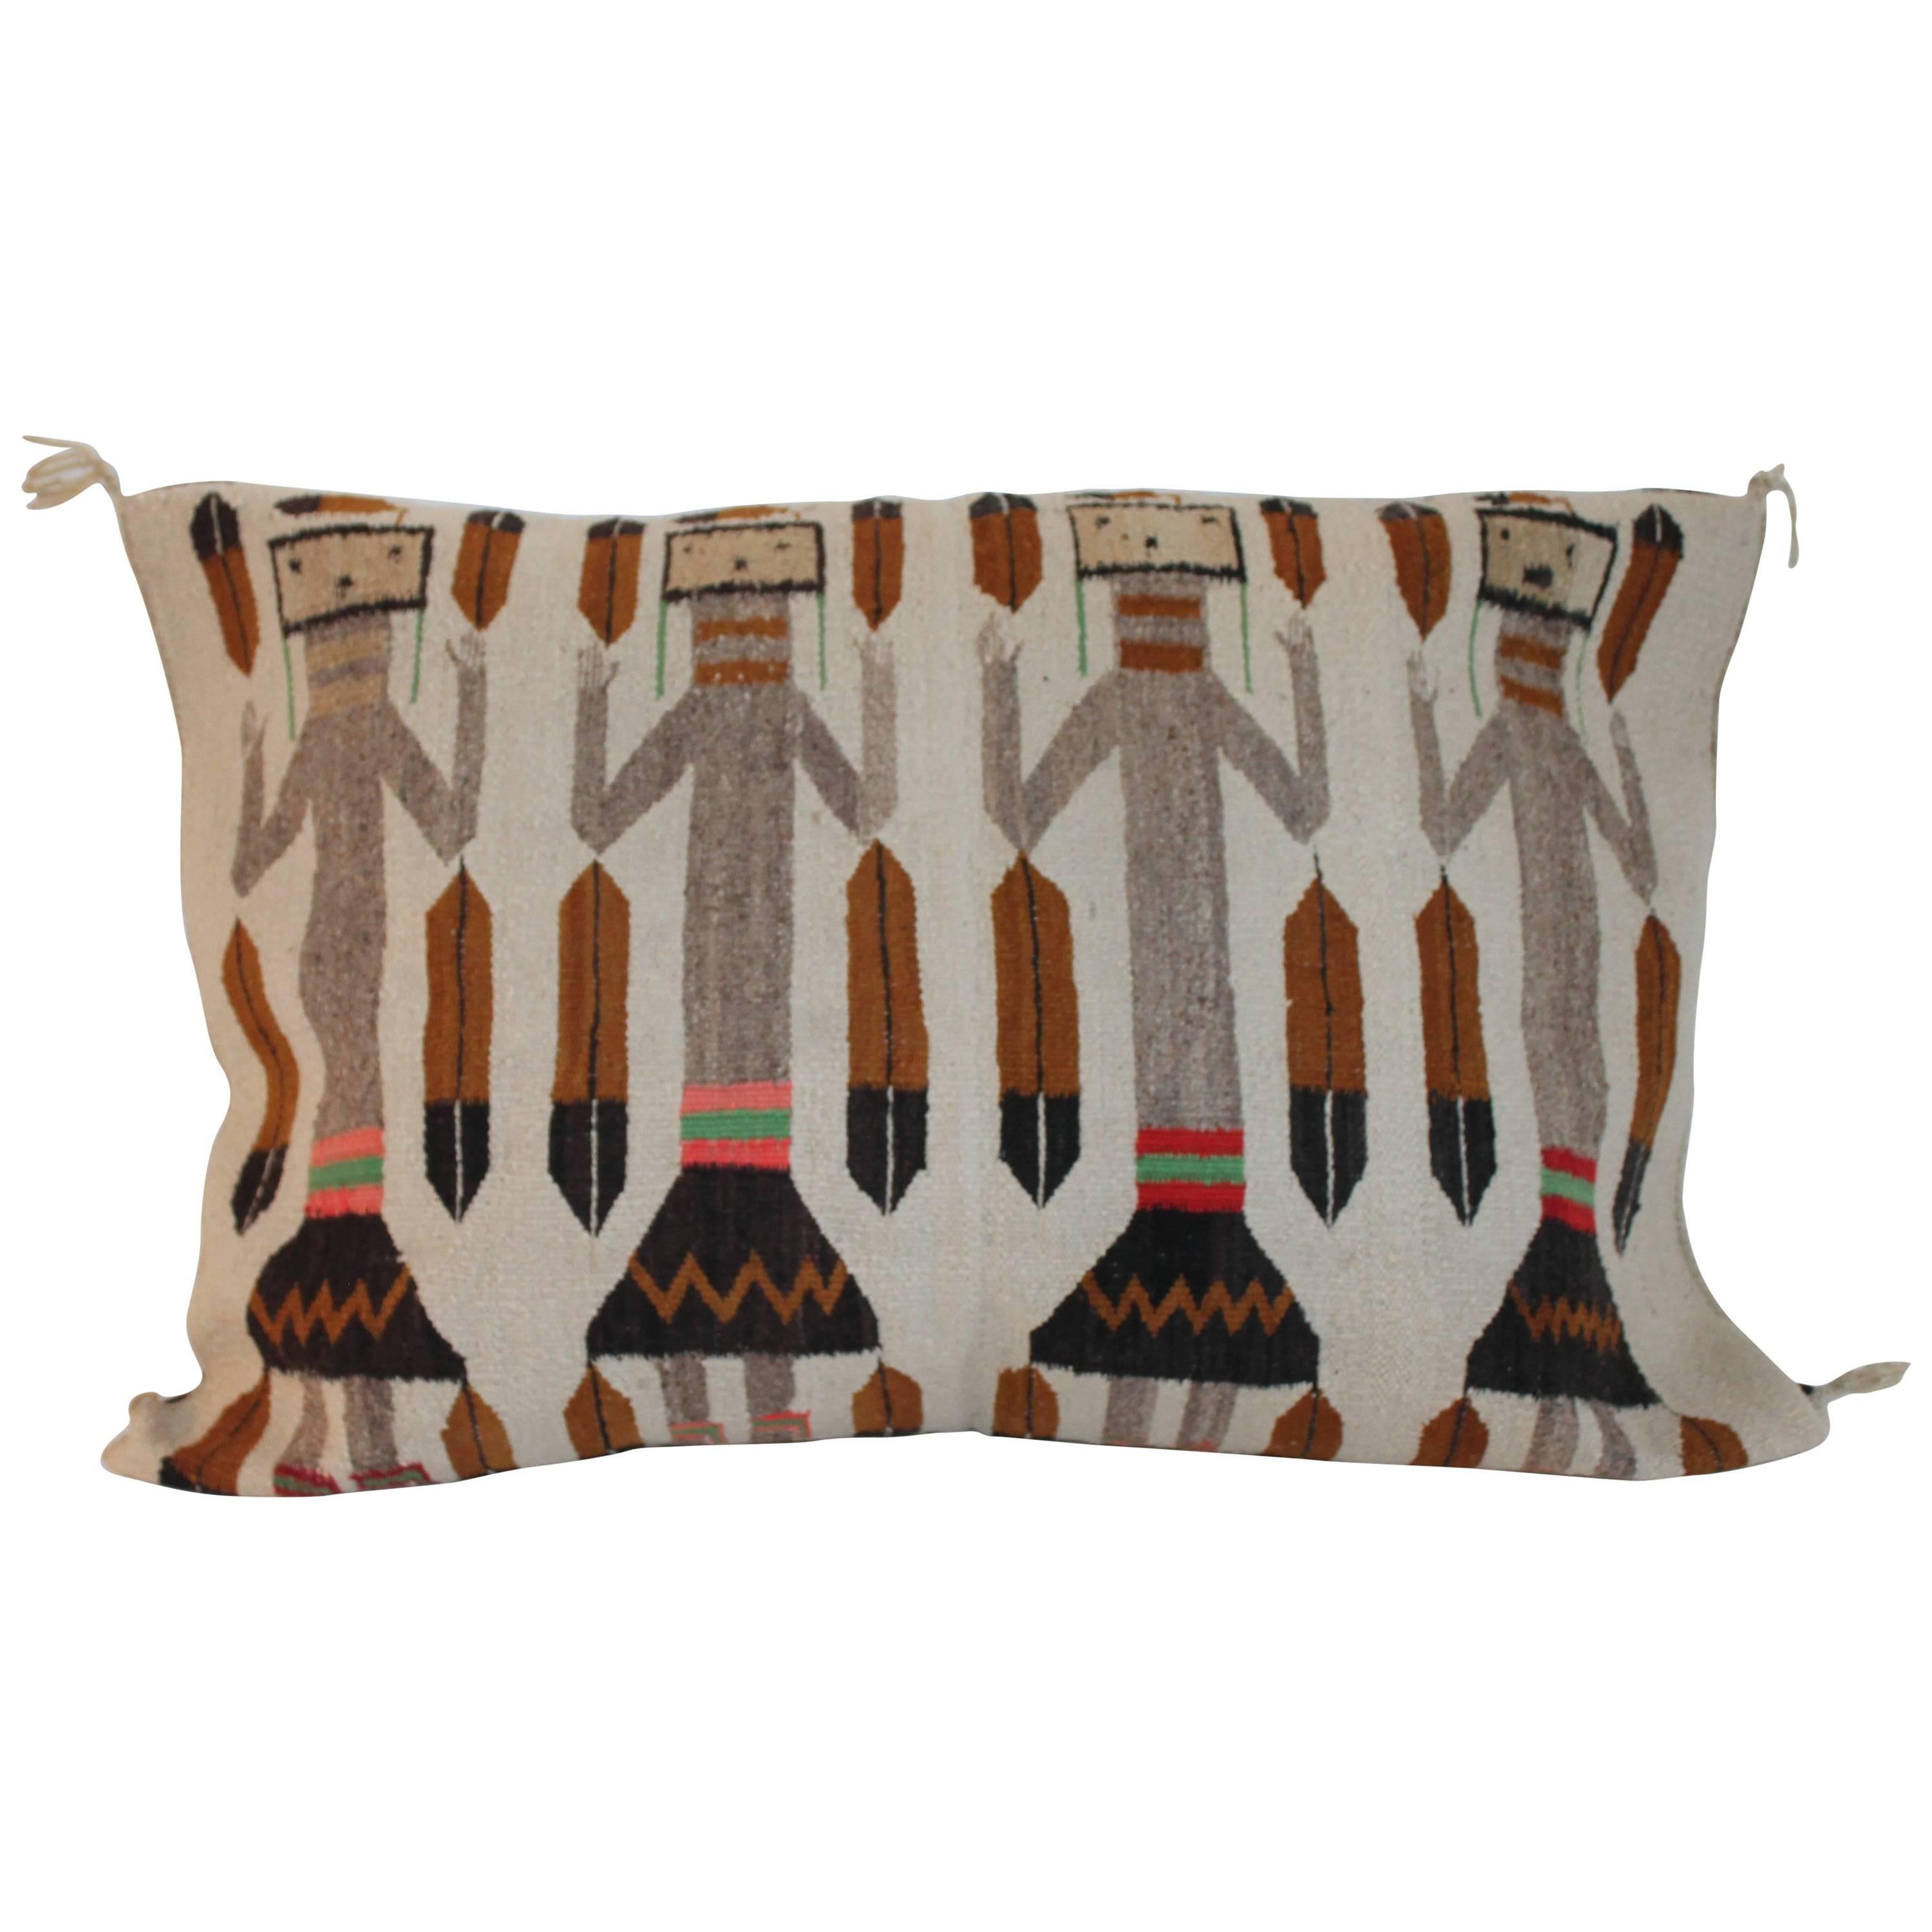 Early and Rare Monumental Yea Navajo Weaving Pillow